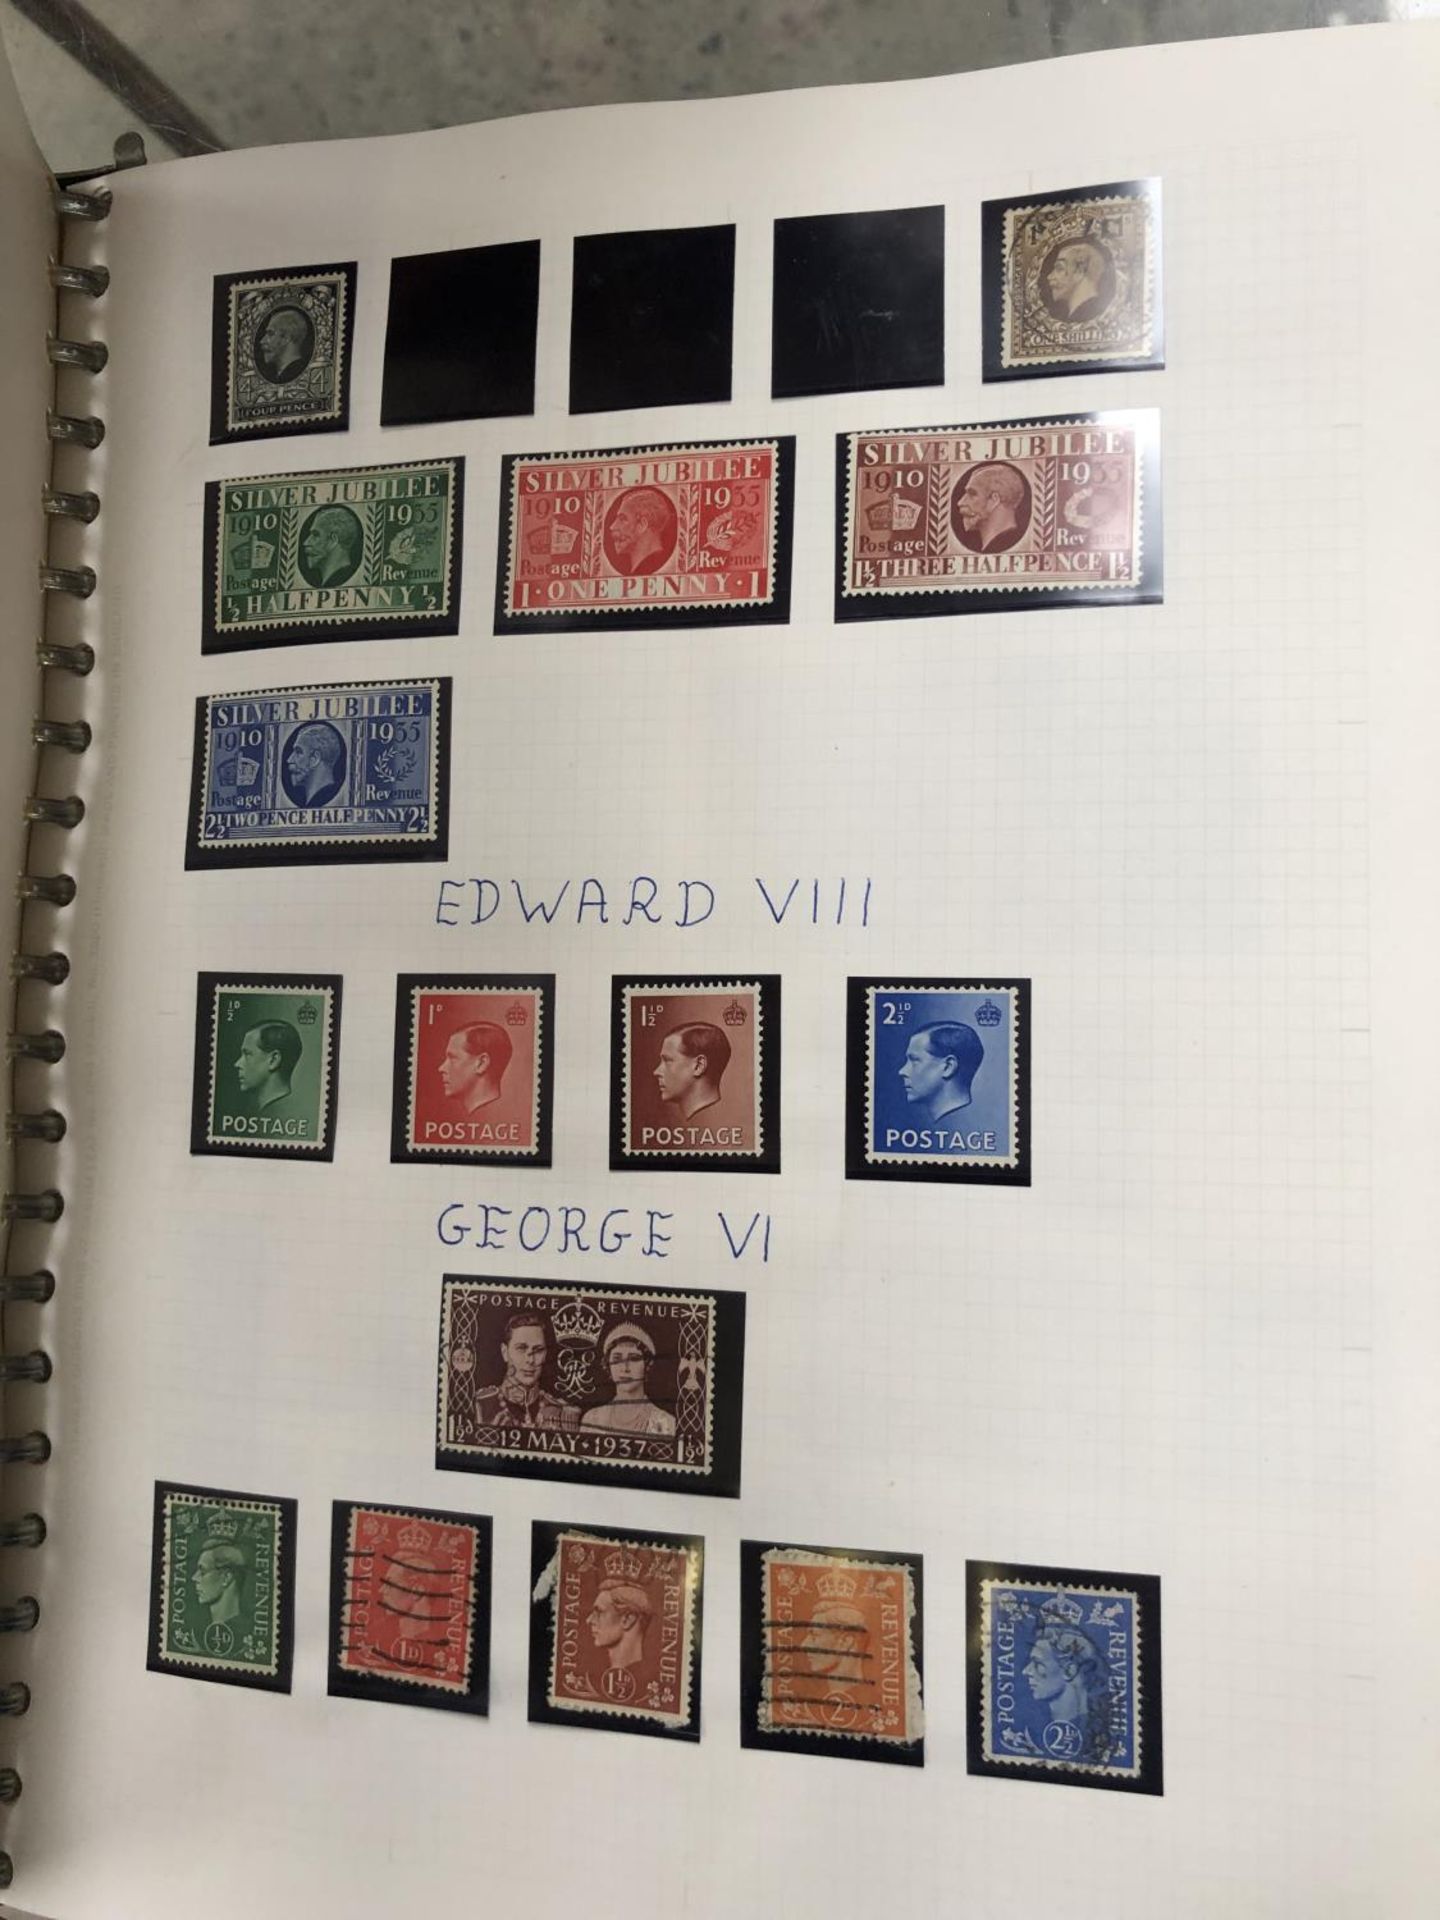 A GREAT BRITAIN STAMP ALBUM, SEE PHOTOS - Image 4 of 10